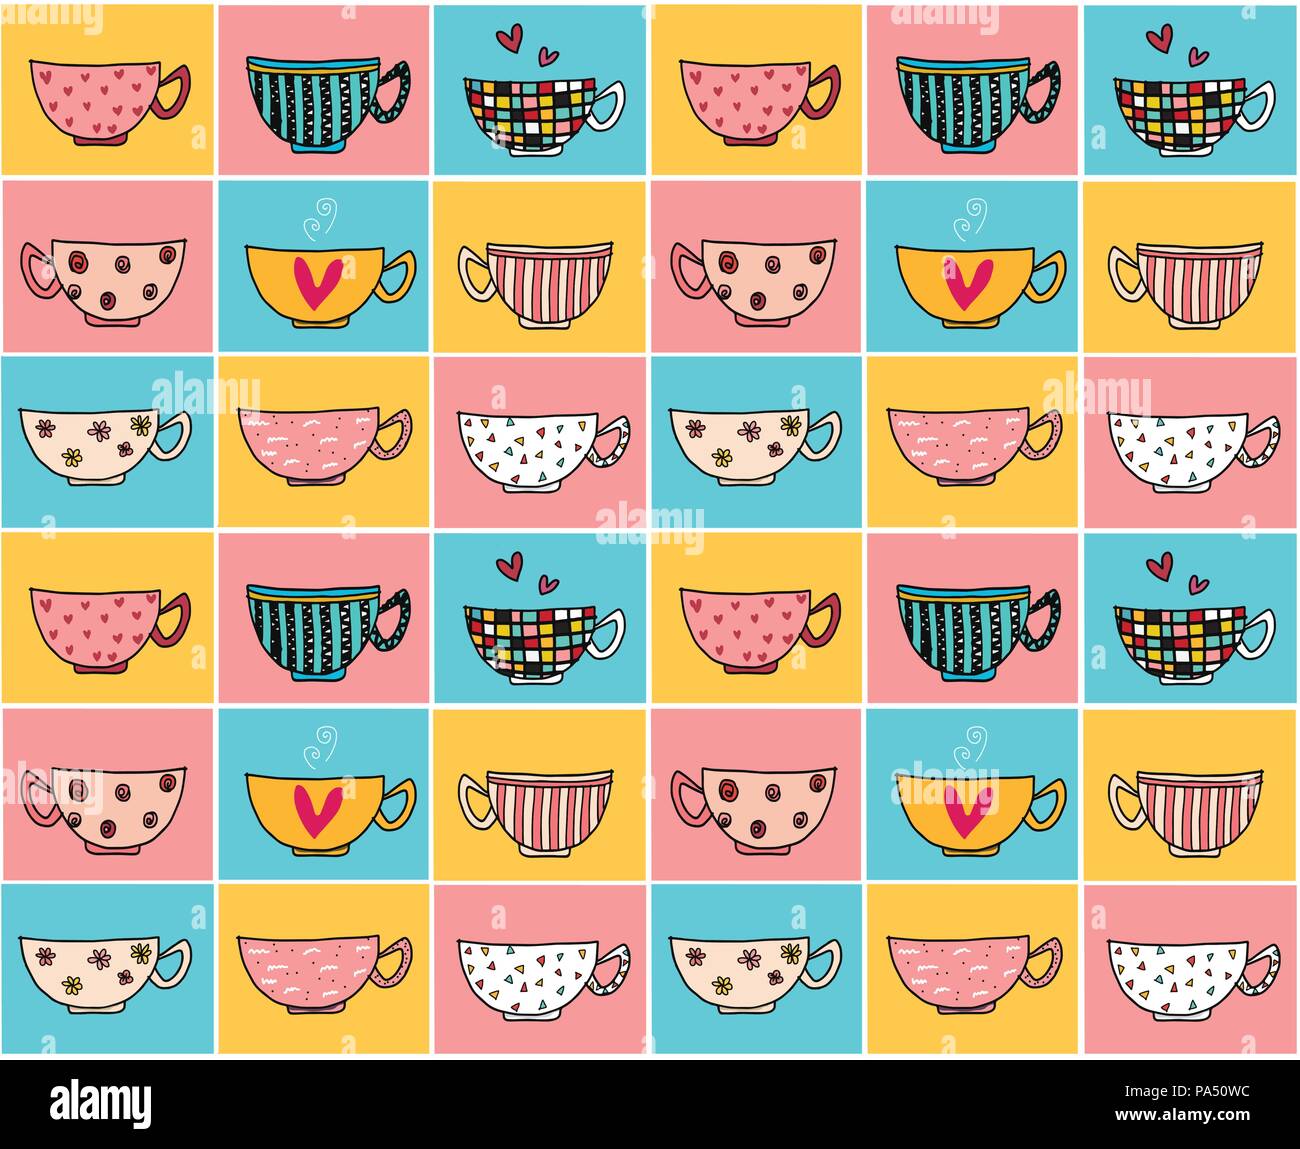 https://c8.alamy.com/comp/PA50WC/doodle-hand-drawing-coffee-cups-in-different-designs-on-colour-vintage-background-pattern-seamless-PA50WC.jpg